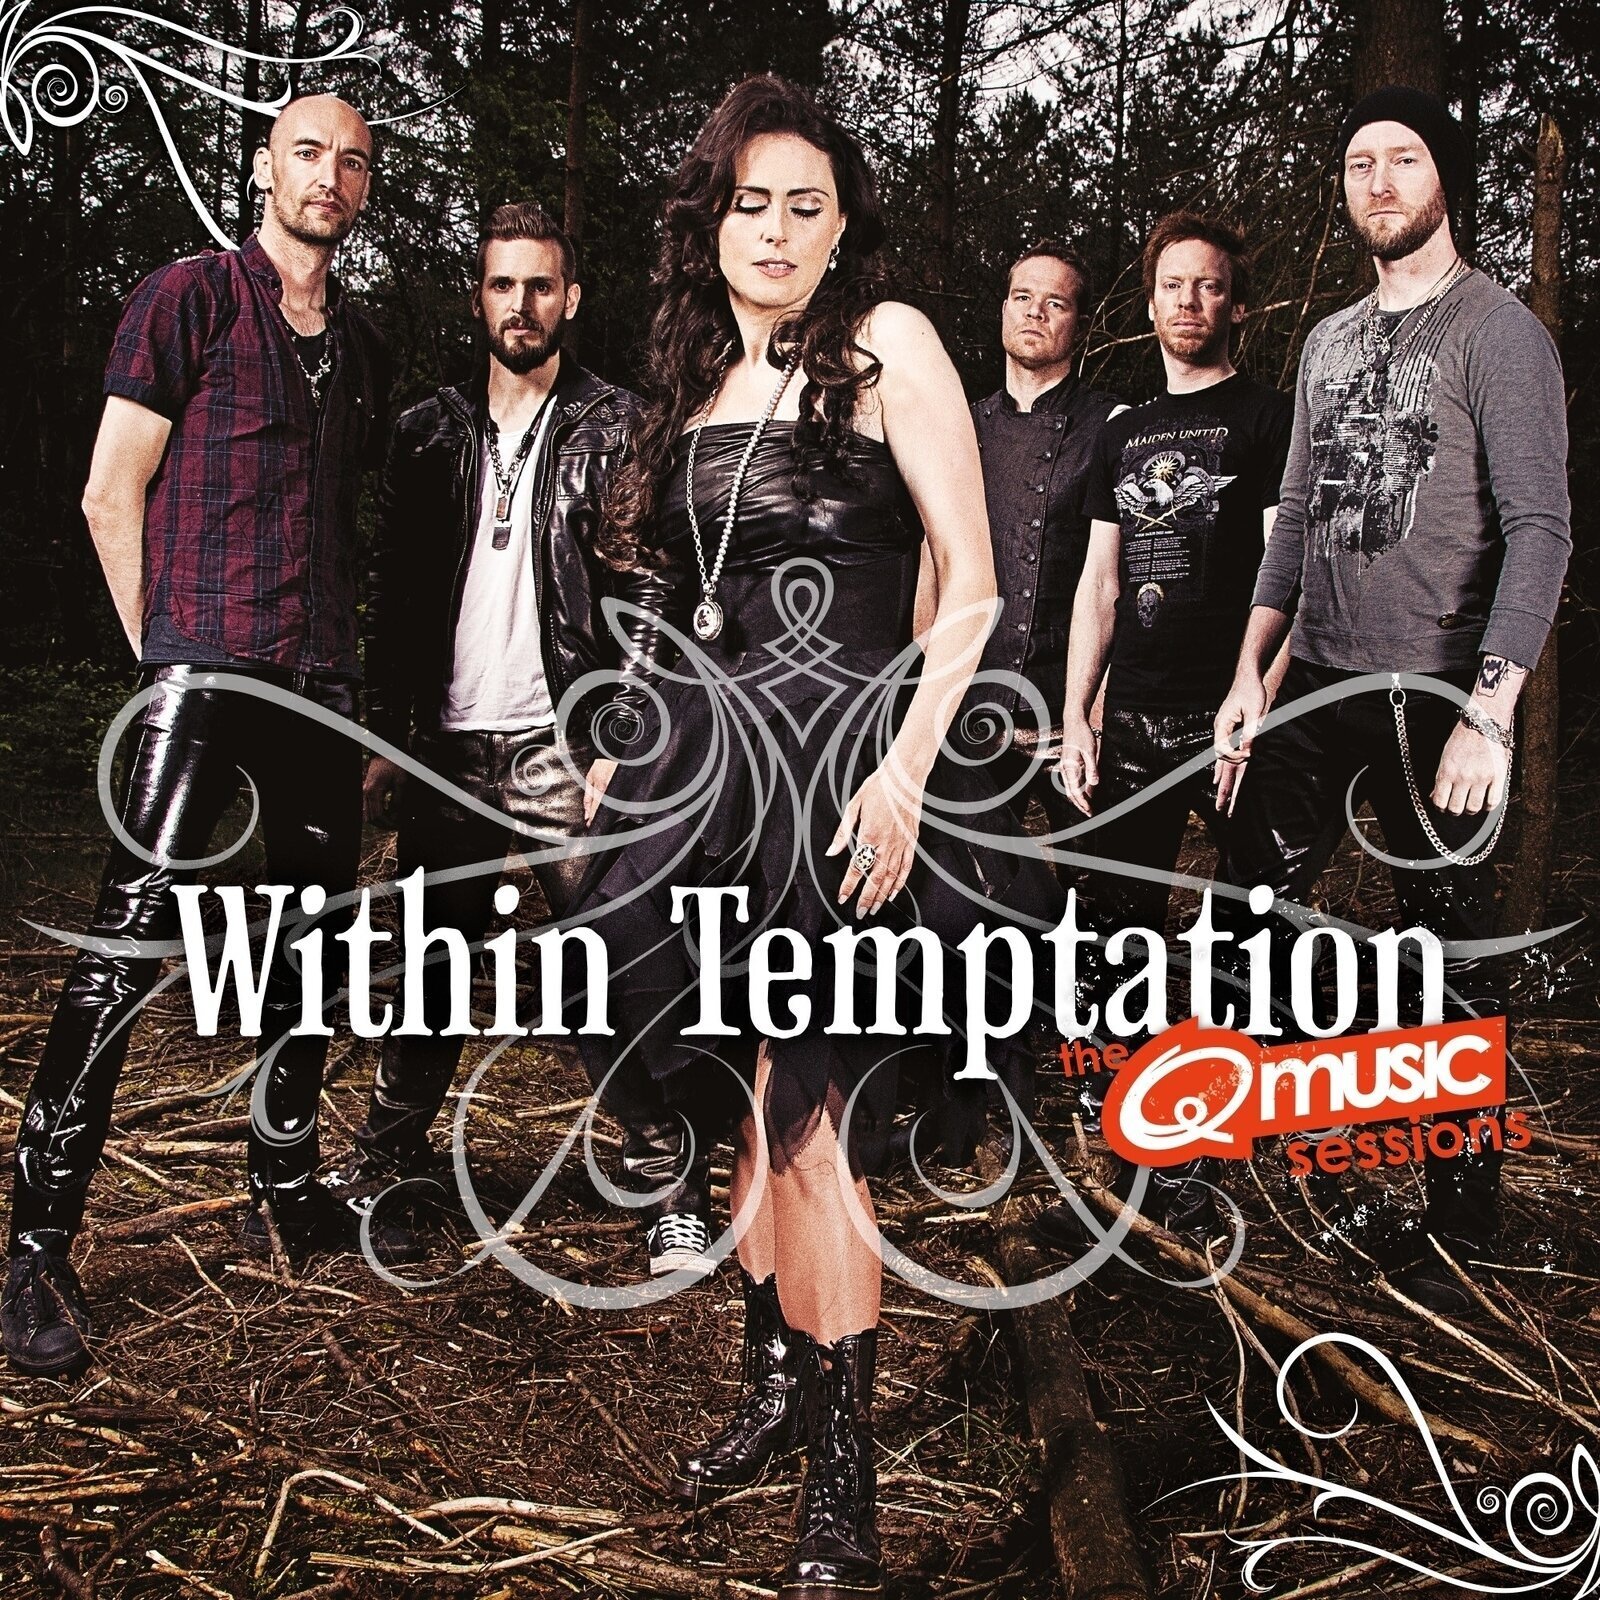 Music CD Within Temptation - The Q-Music Sessions (Slipcase) (Limited Edition) (CD)